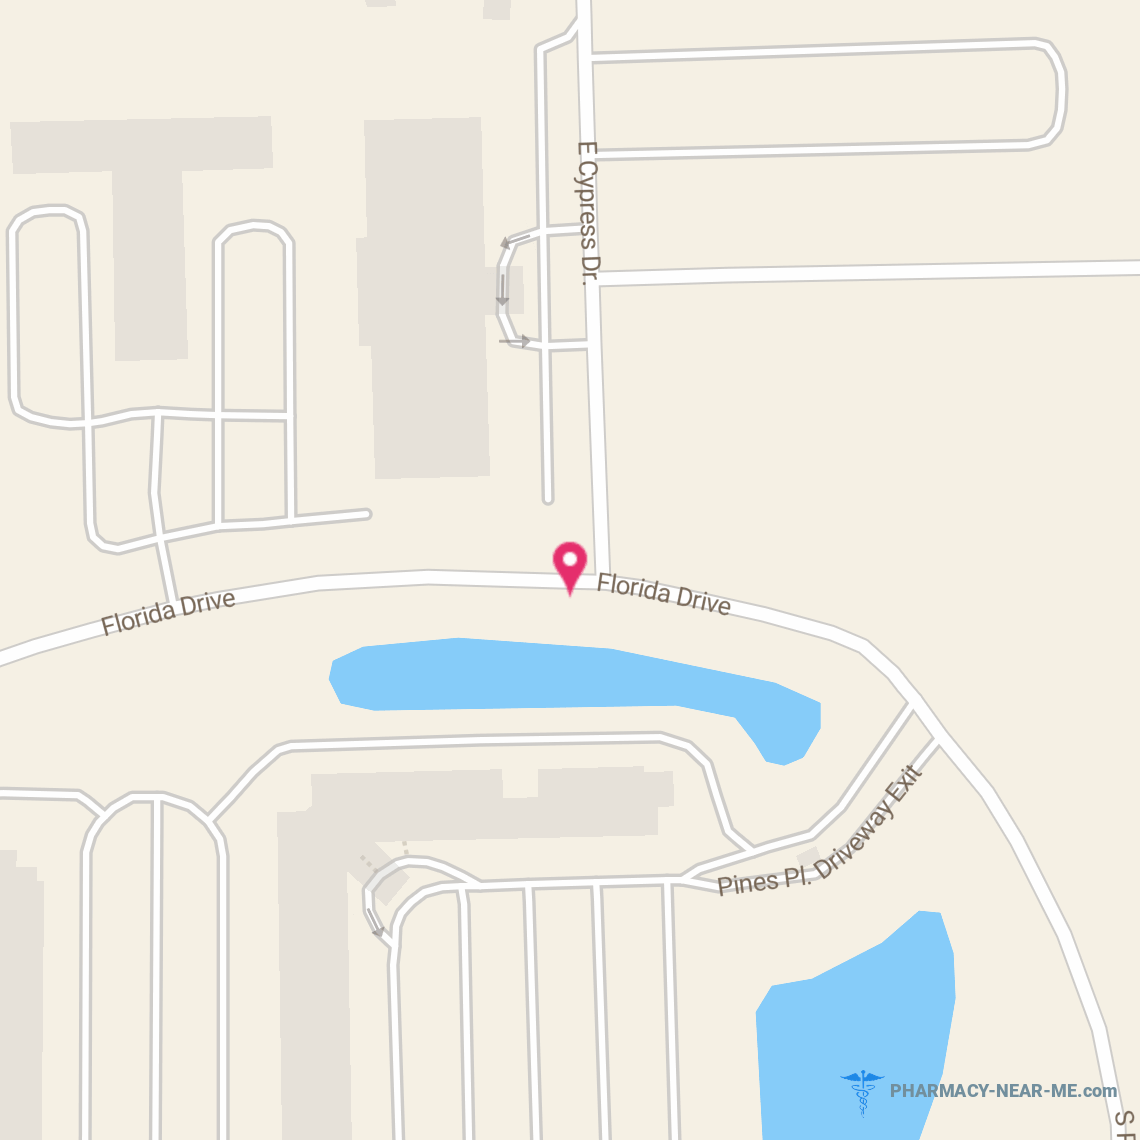 S FL STATE HOSP - Pharmacy Hours, Phone, Reviews & Information: 800 E Cypress Dr, Pembroke Pines, Florida 33025, United States